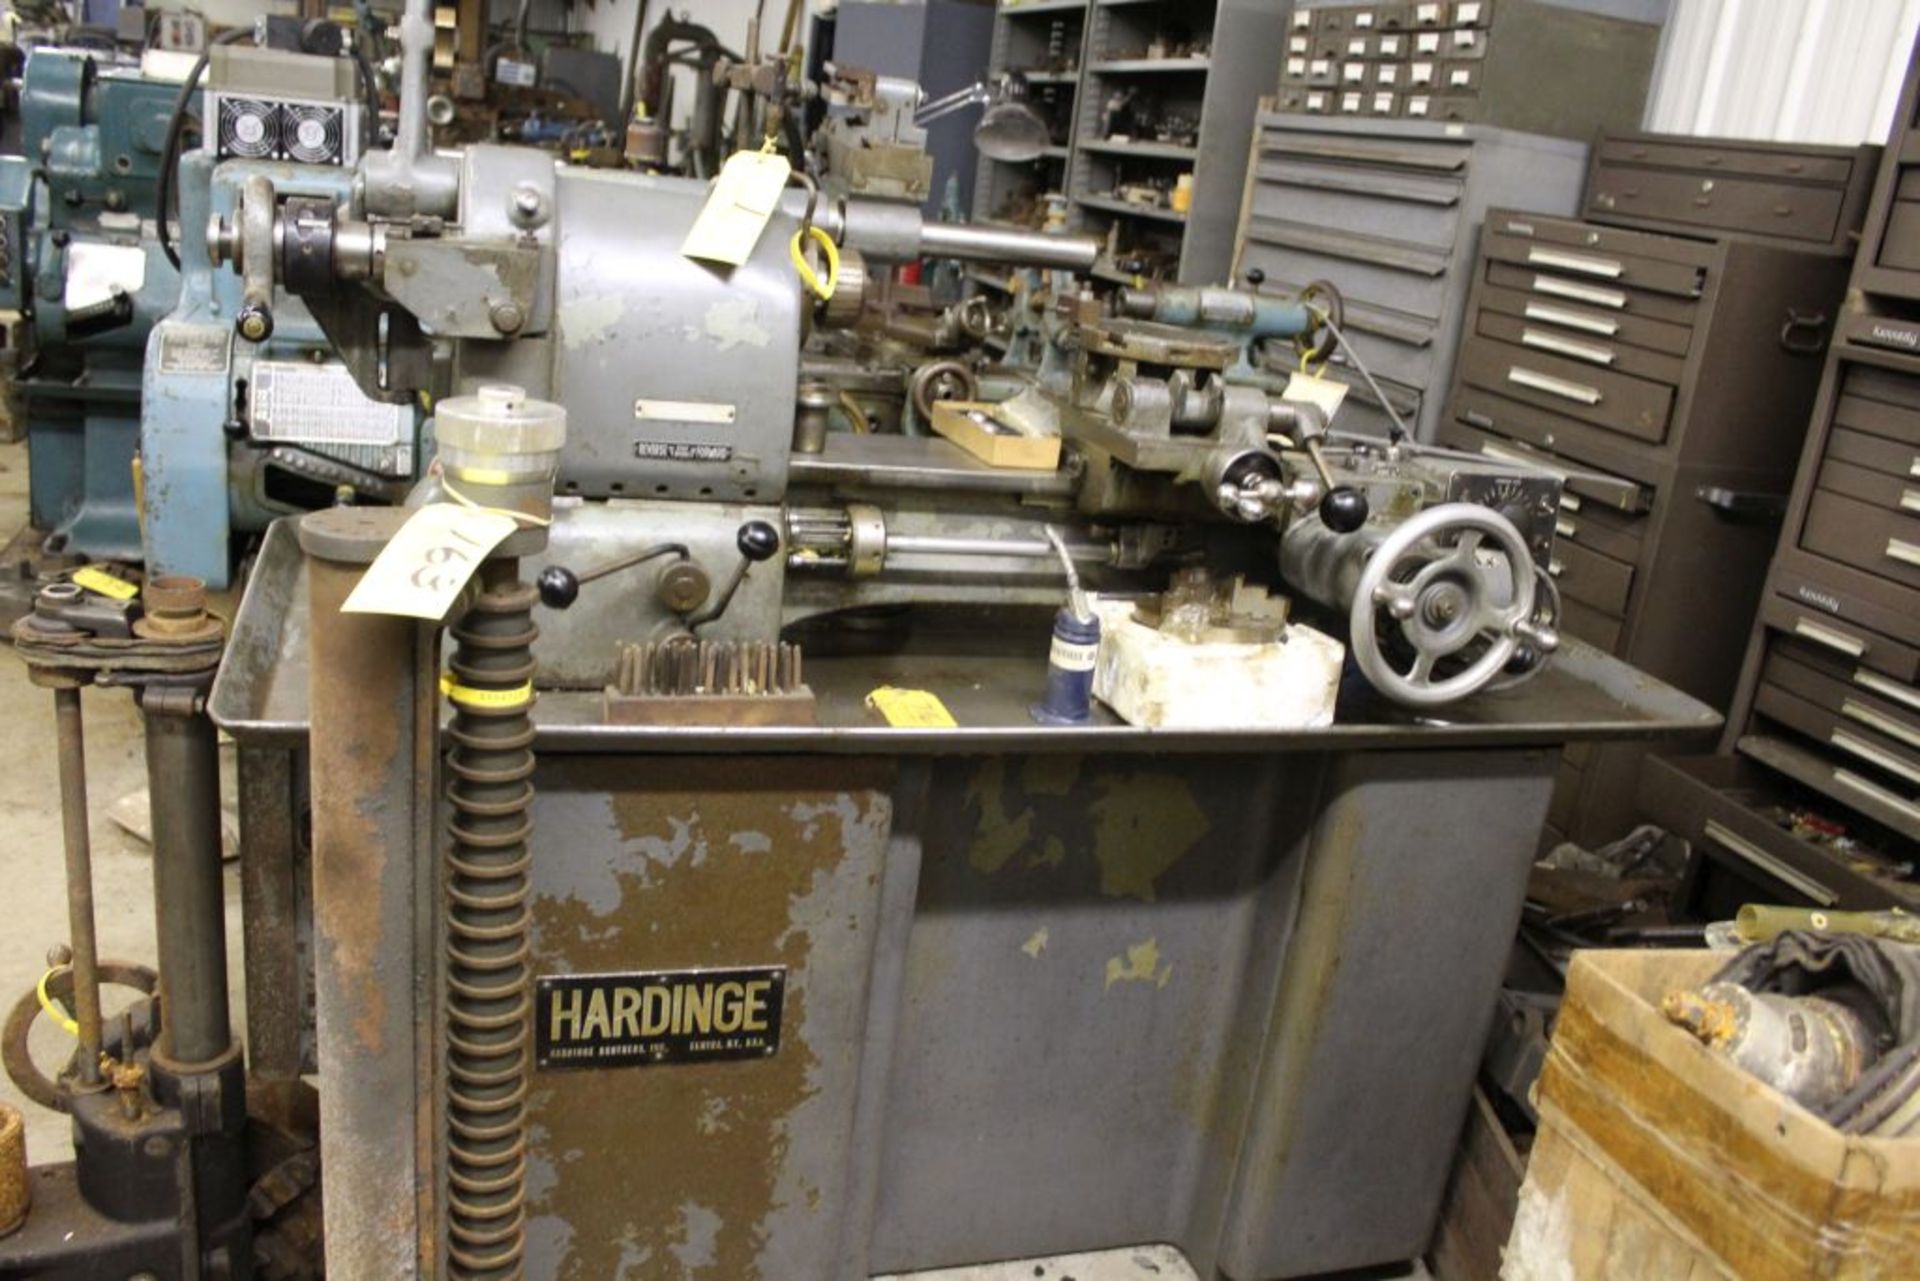 Hardinge lathe model HCT, 16" bed, 2" hole, carriage feed, thread attachment, 1 hp, 3 phase, 220 - Image 5 of 8